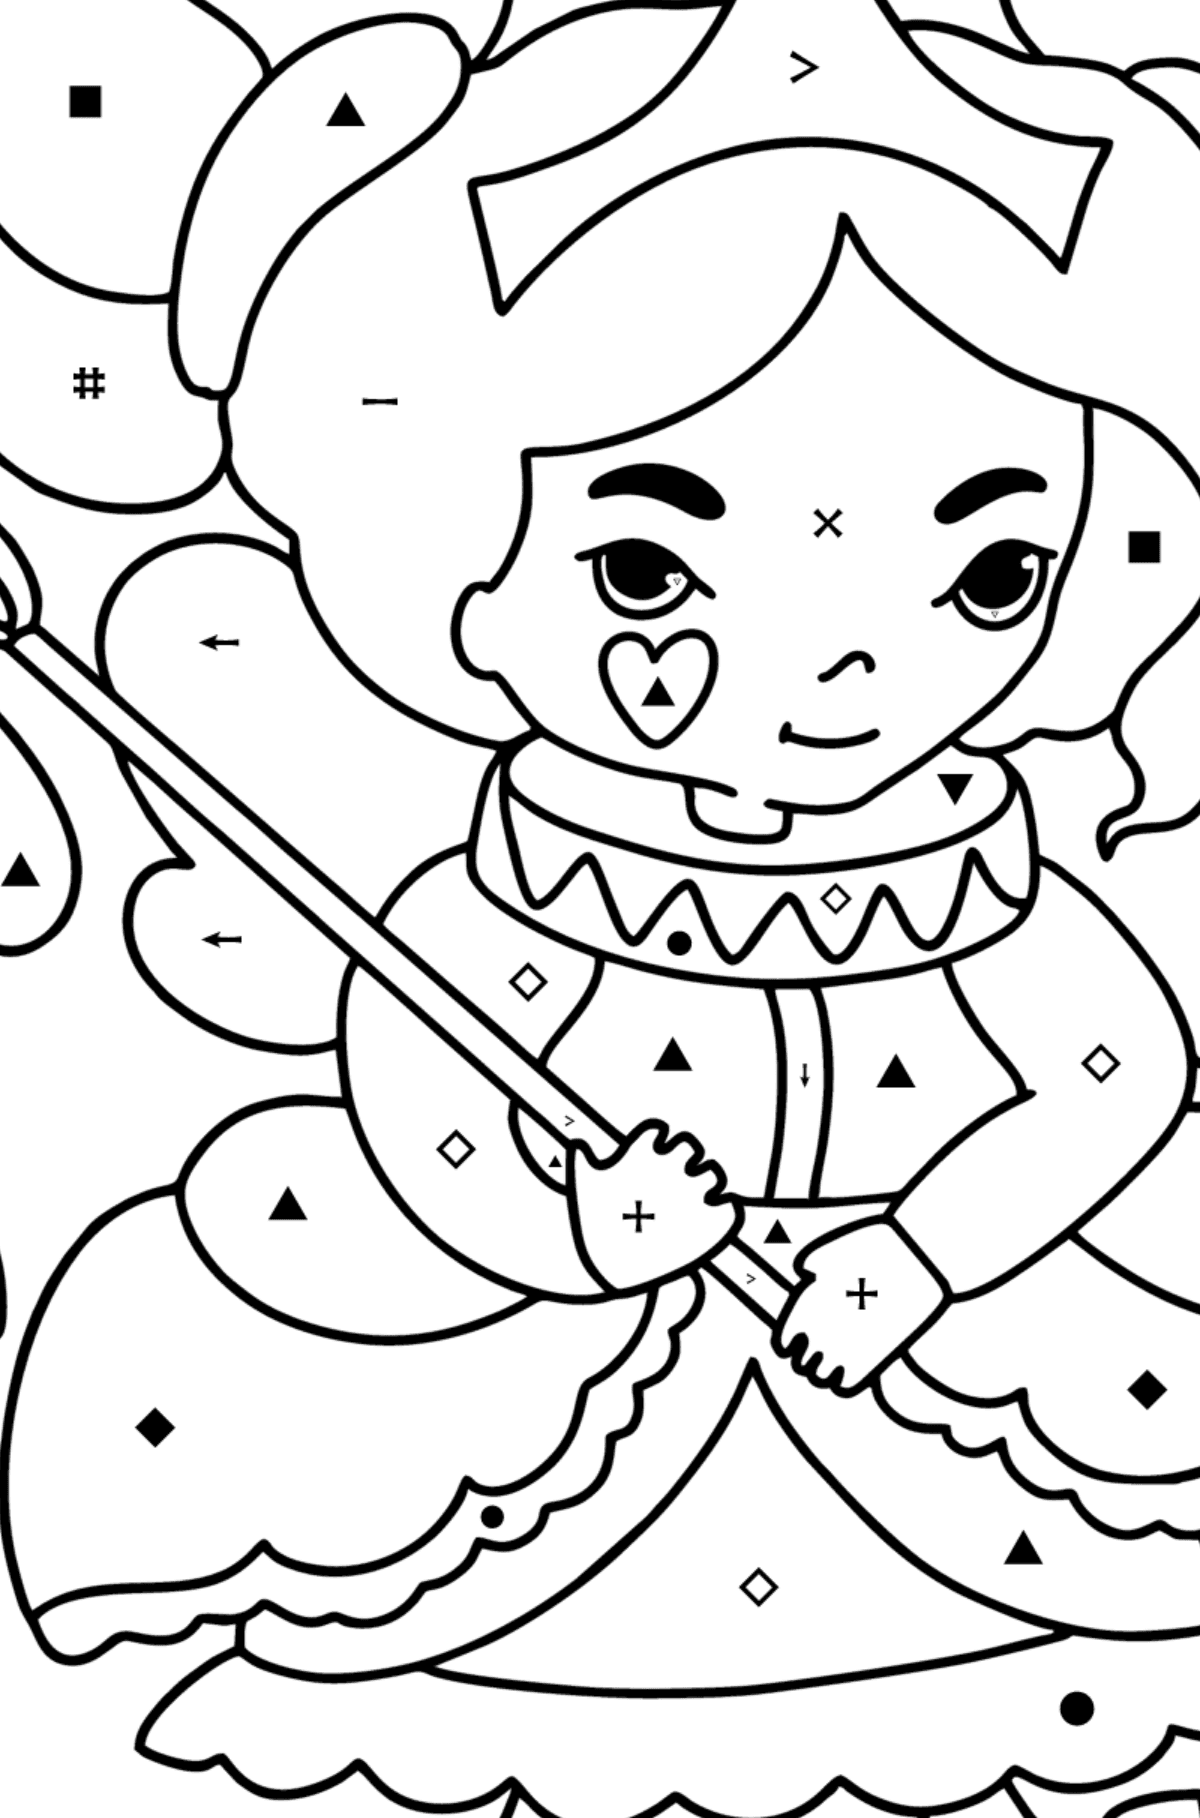 Fairy in a beautiful dress coloring page - Coloring by Symbols for Kids